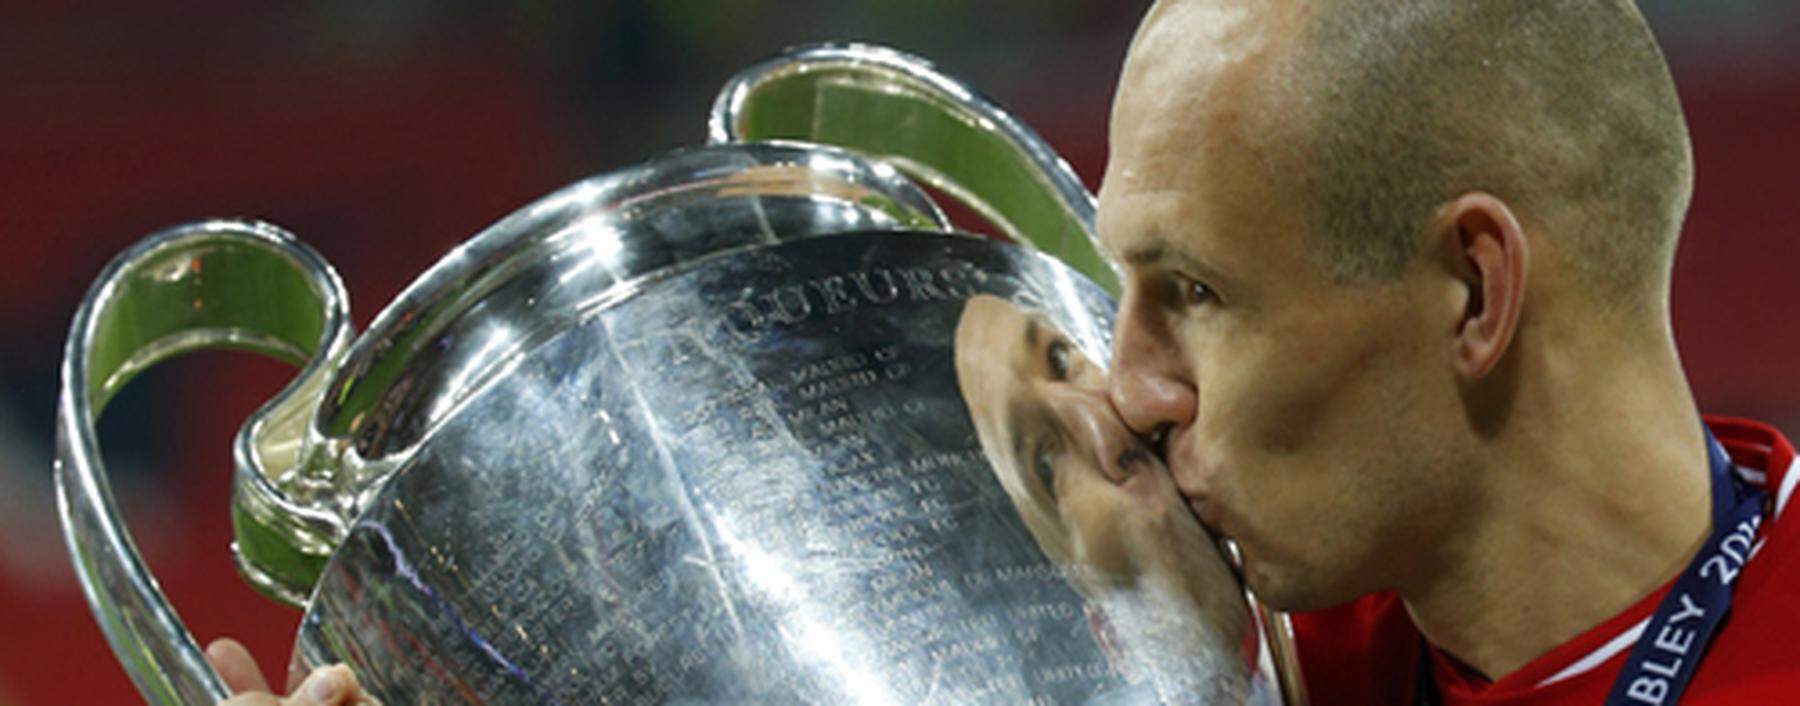 Bayern Munich's Robben kisses the trophy after defeating Borussia Dortmund in their Champions League Final soccer match at Wembley Stadium in London